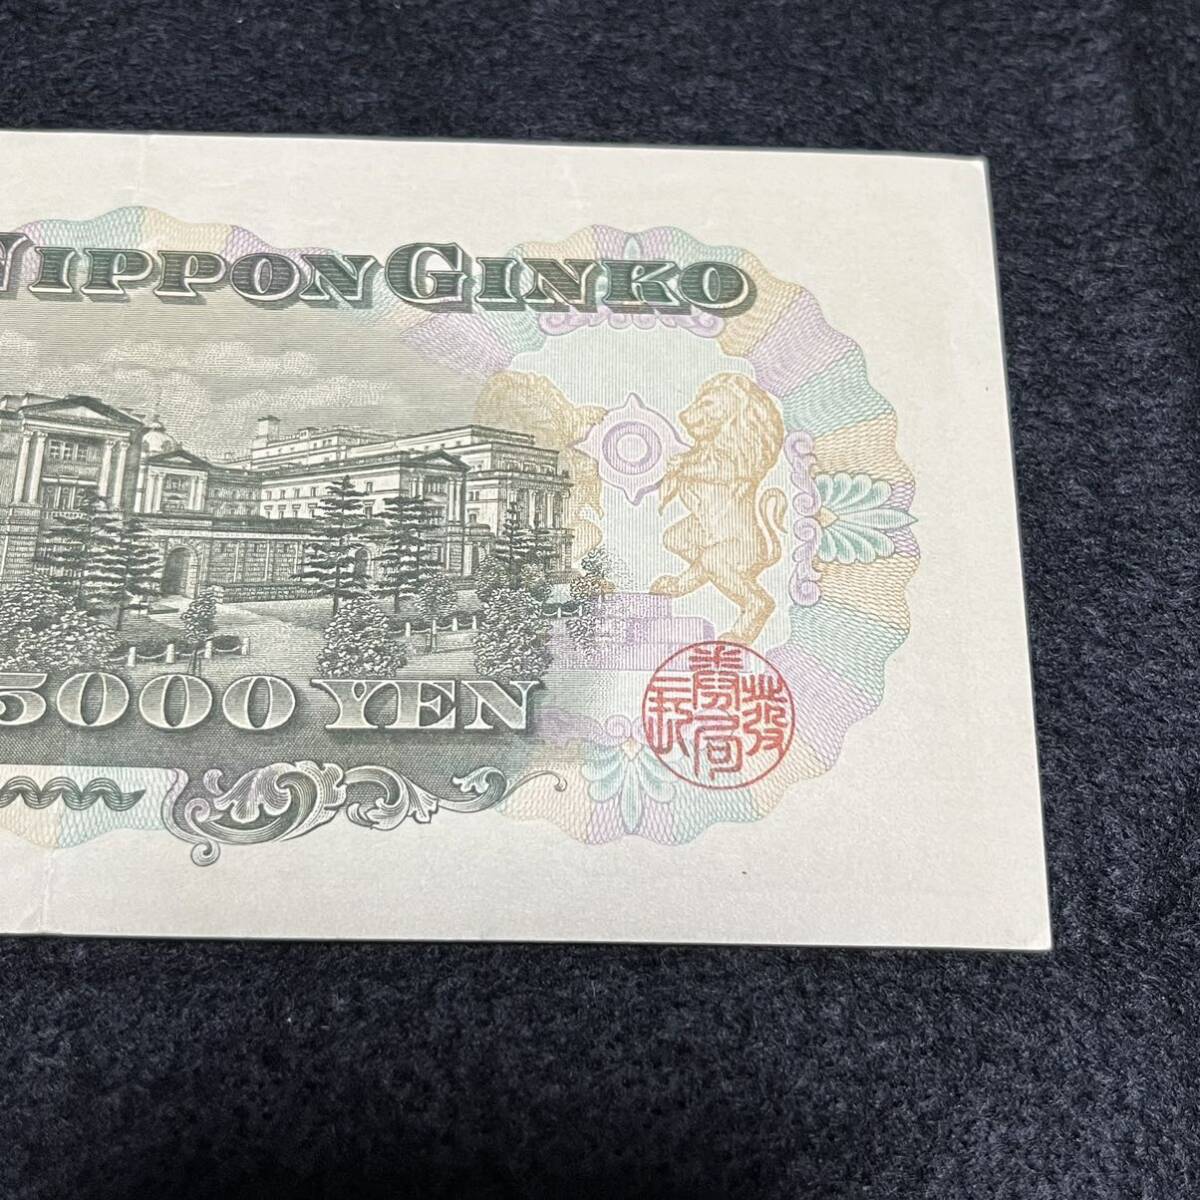 ( pin ., unused goods, non present ). virtue futoshi .Q276153W. thousand jpy note Japan Bank ticket collection antique old note . thousand jpy . old .